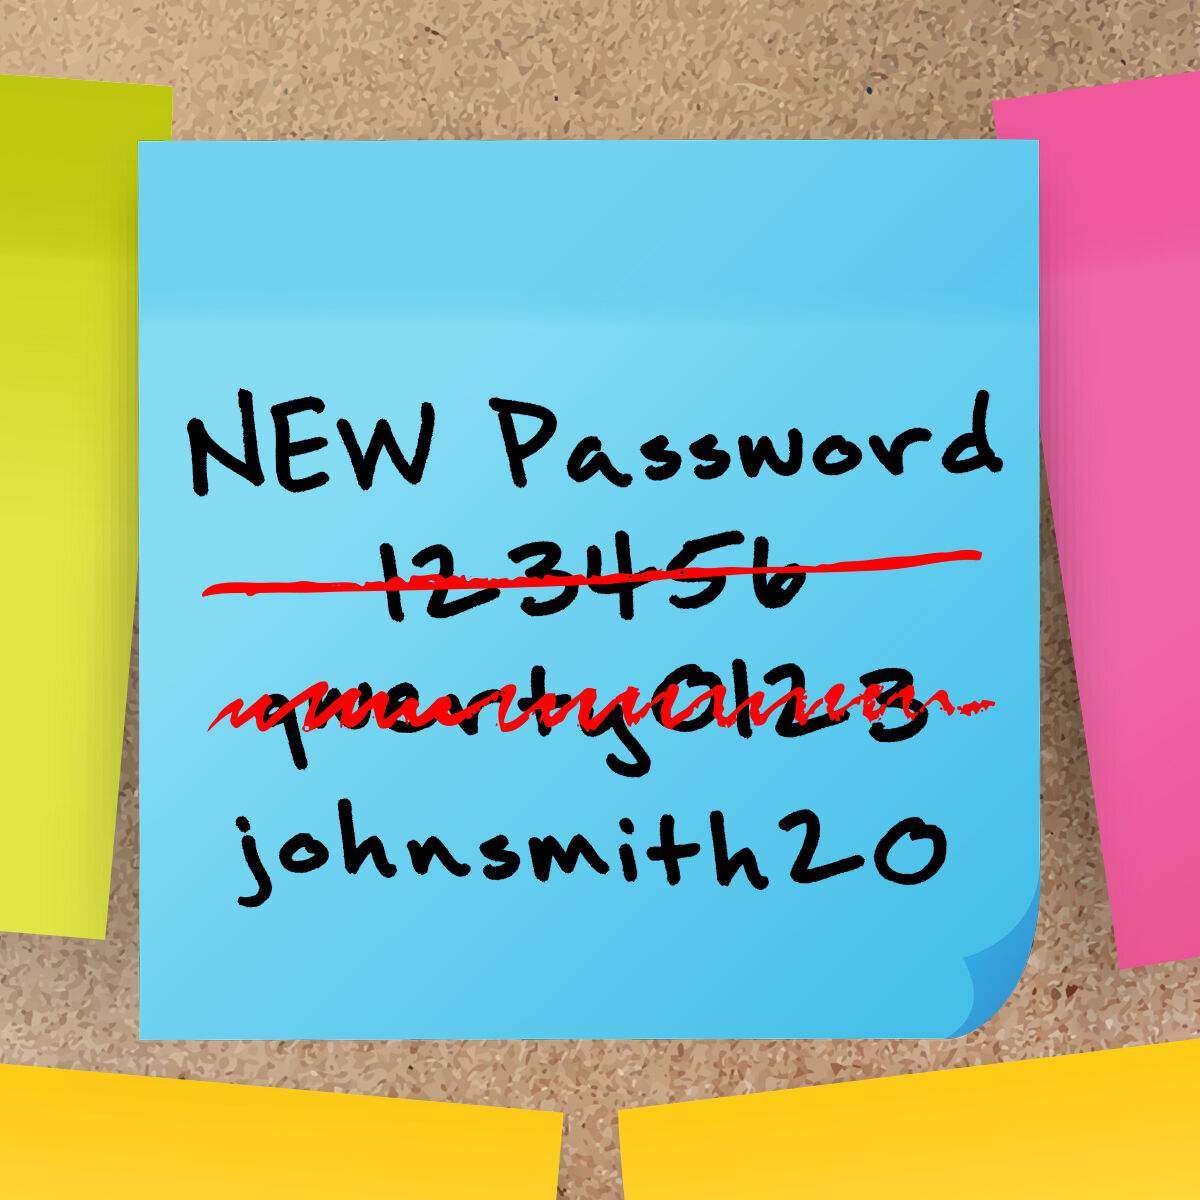 The original password manager!

#PasswordManager #DigitalSecurity #Cybersecurity #DataProtection #OnlineSafety #PasswordSecurity #TechSolutions #DigitalLife #InternetSecurity #PrivacyProtection #SecurePasswords #DigitalIdentity #PasswordProtection #SecurityTools